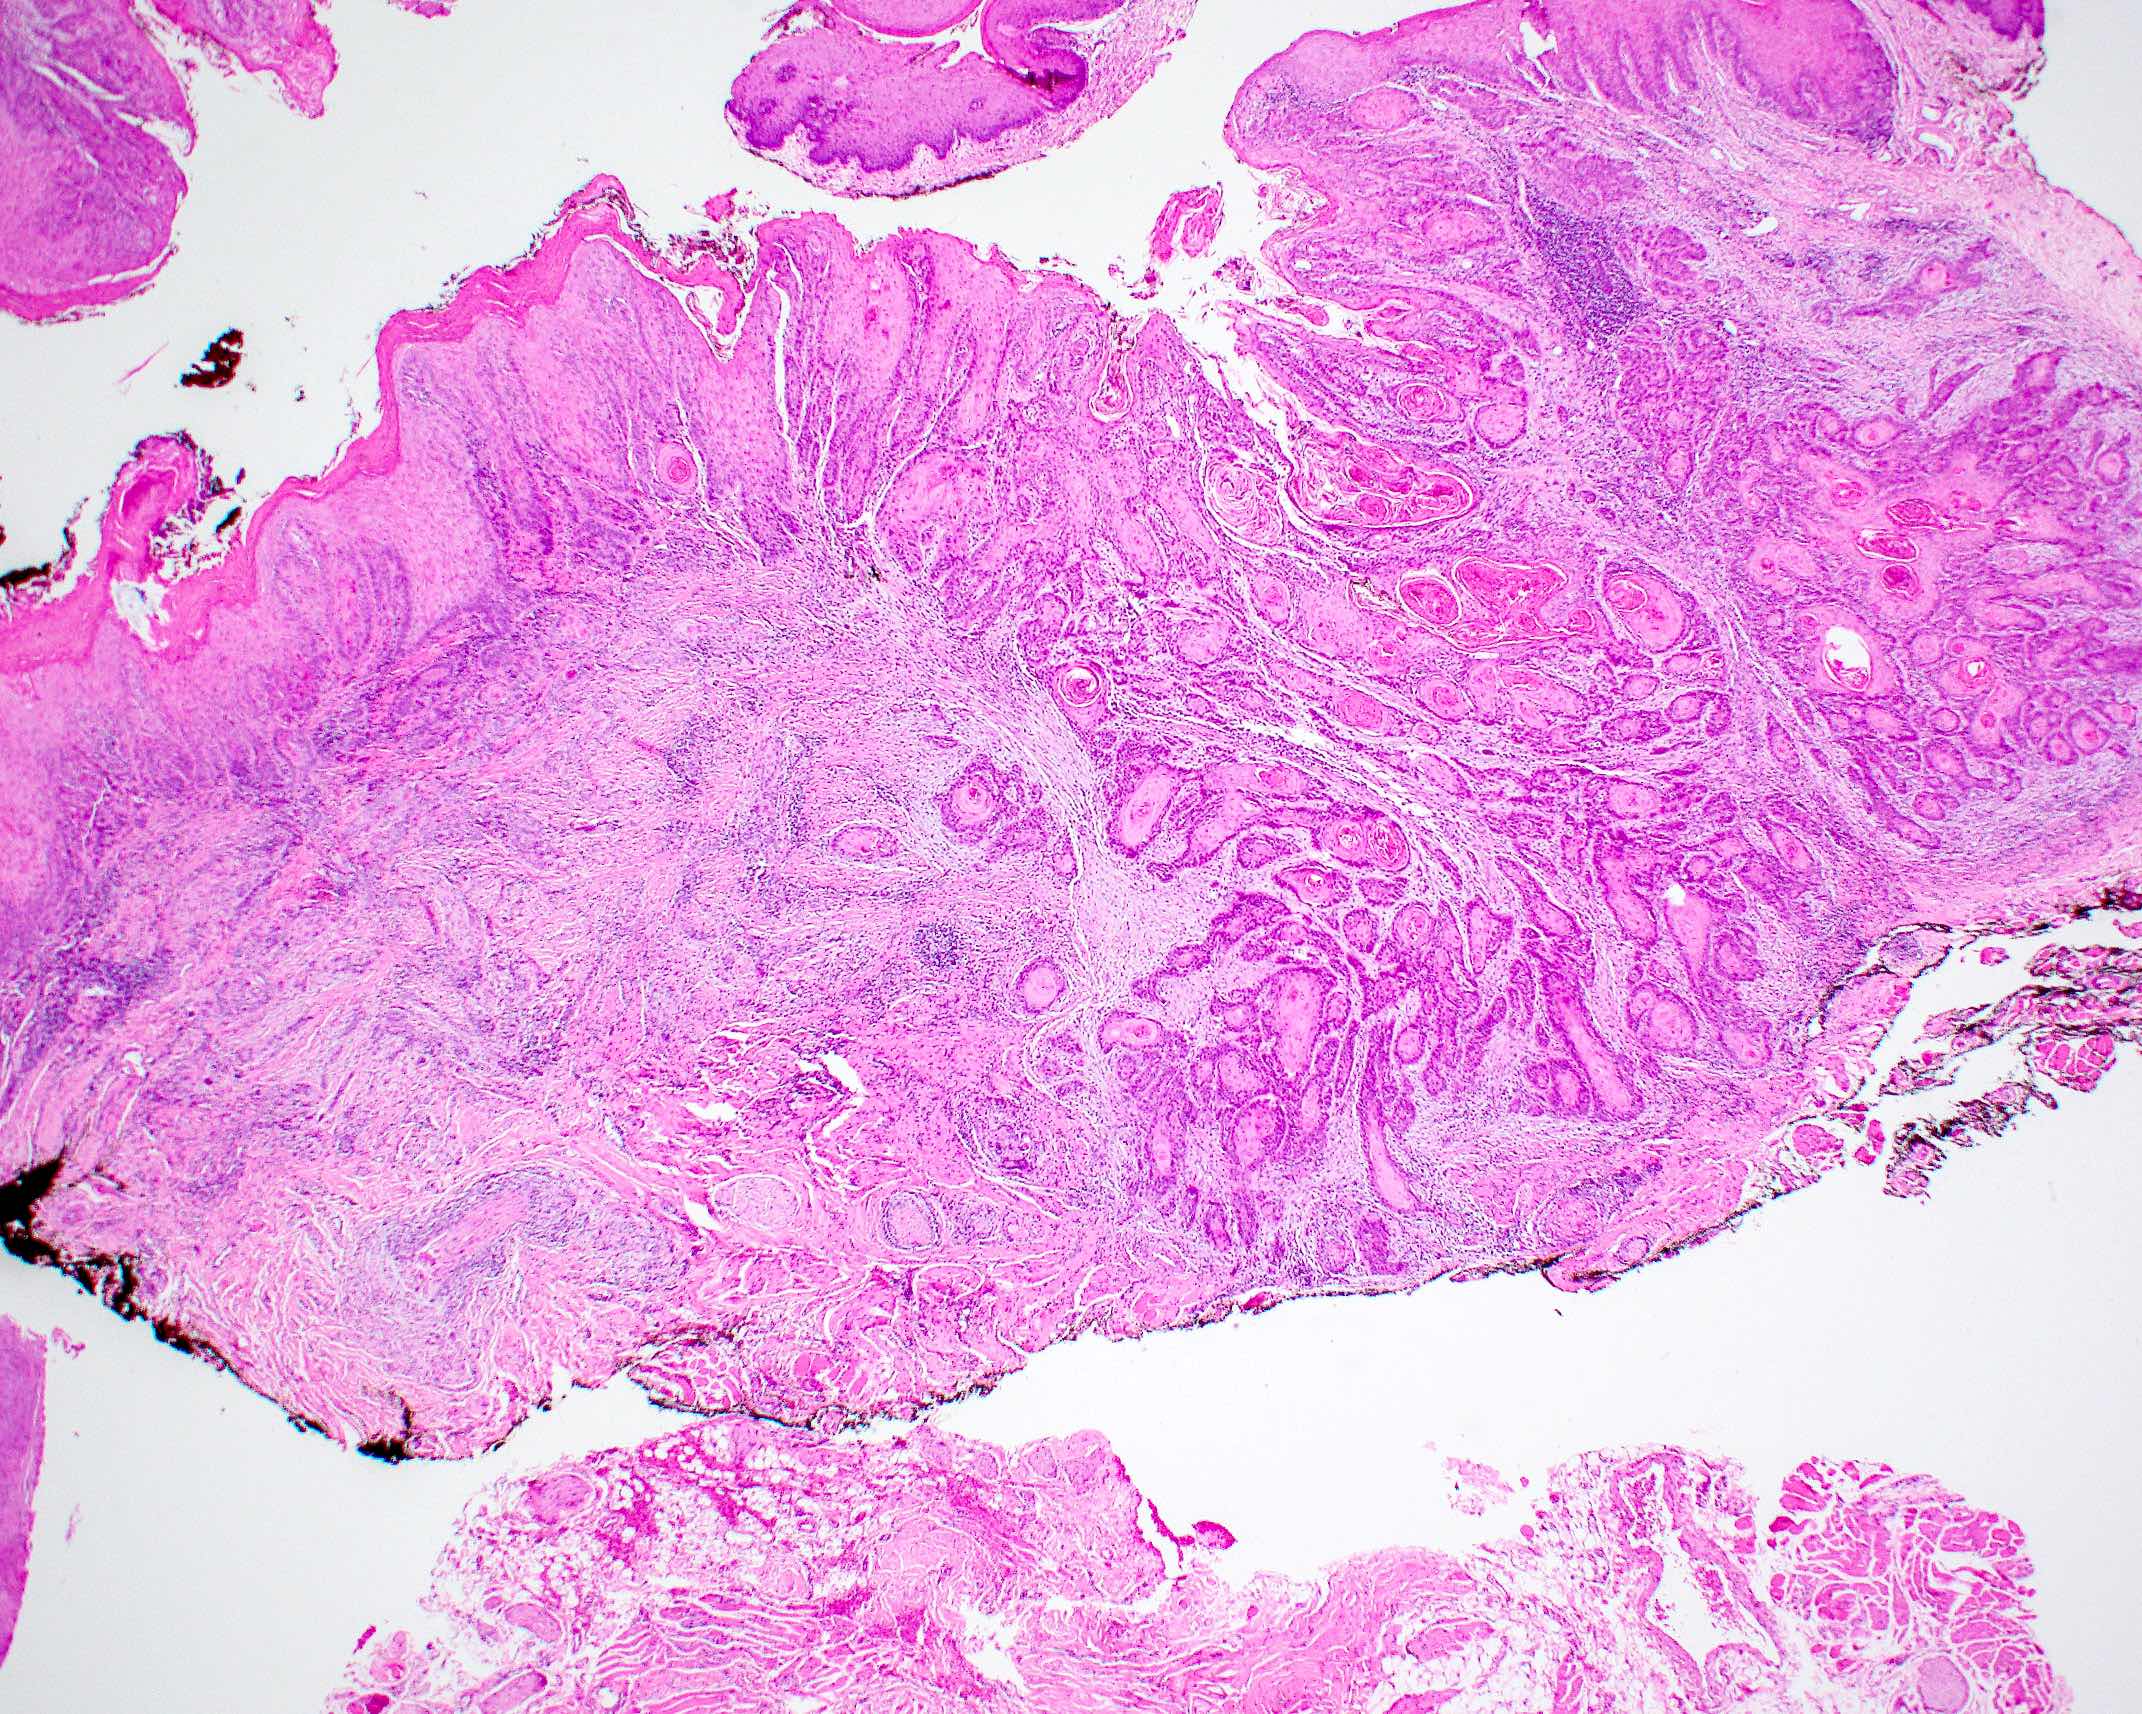 Squamous cell carcinoma transformation